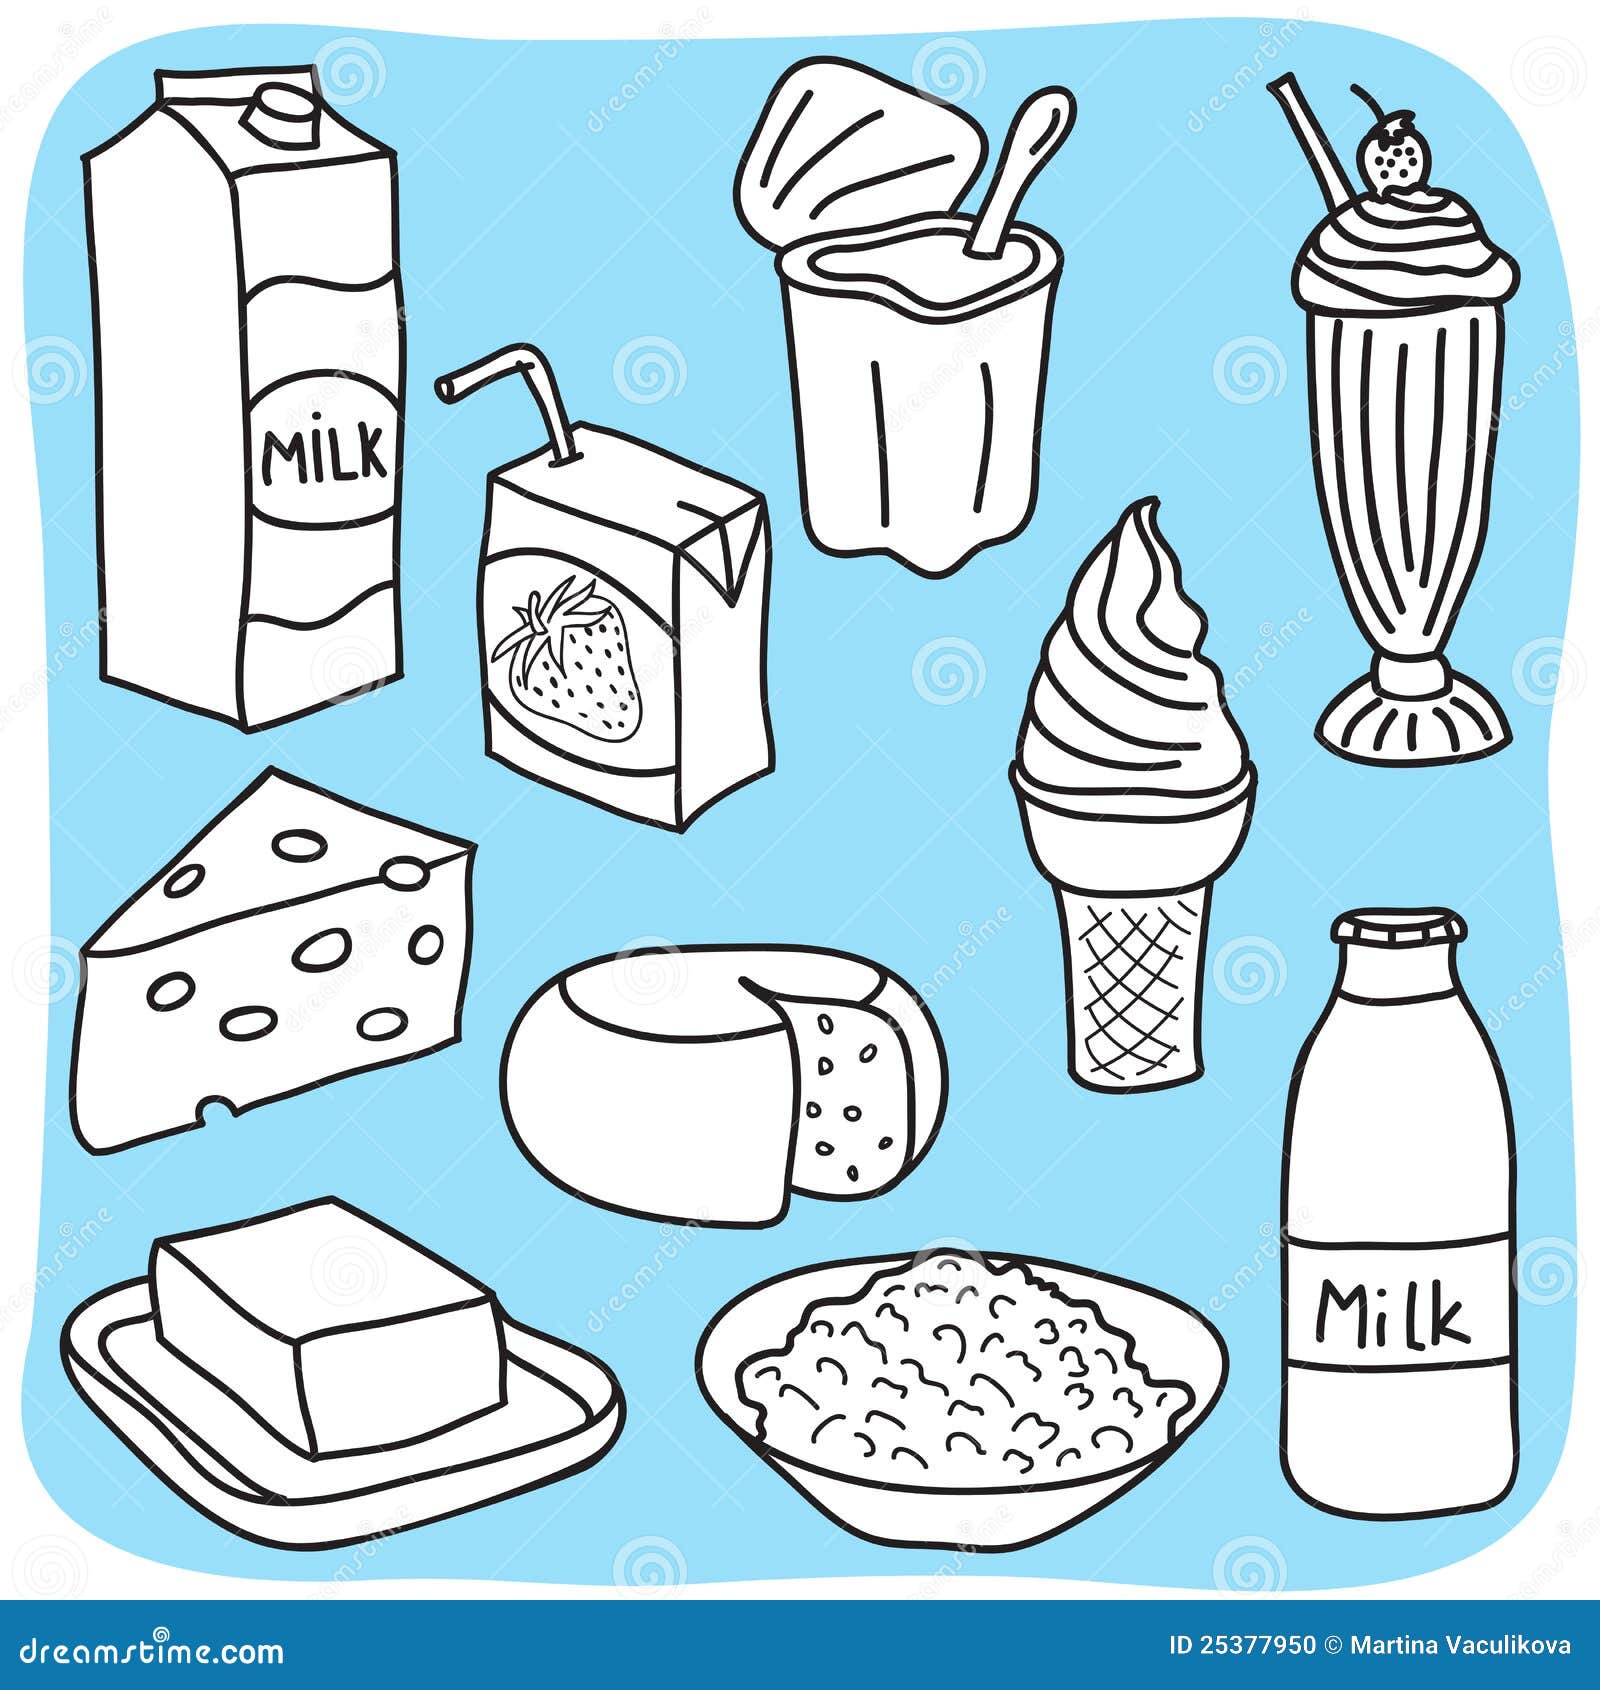 Milk sketch hand drawn dairy products in jugs Vector Image